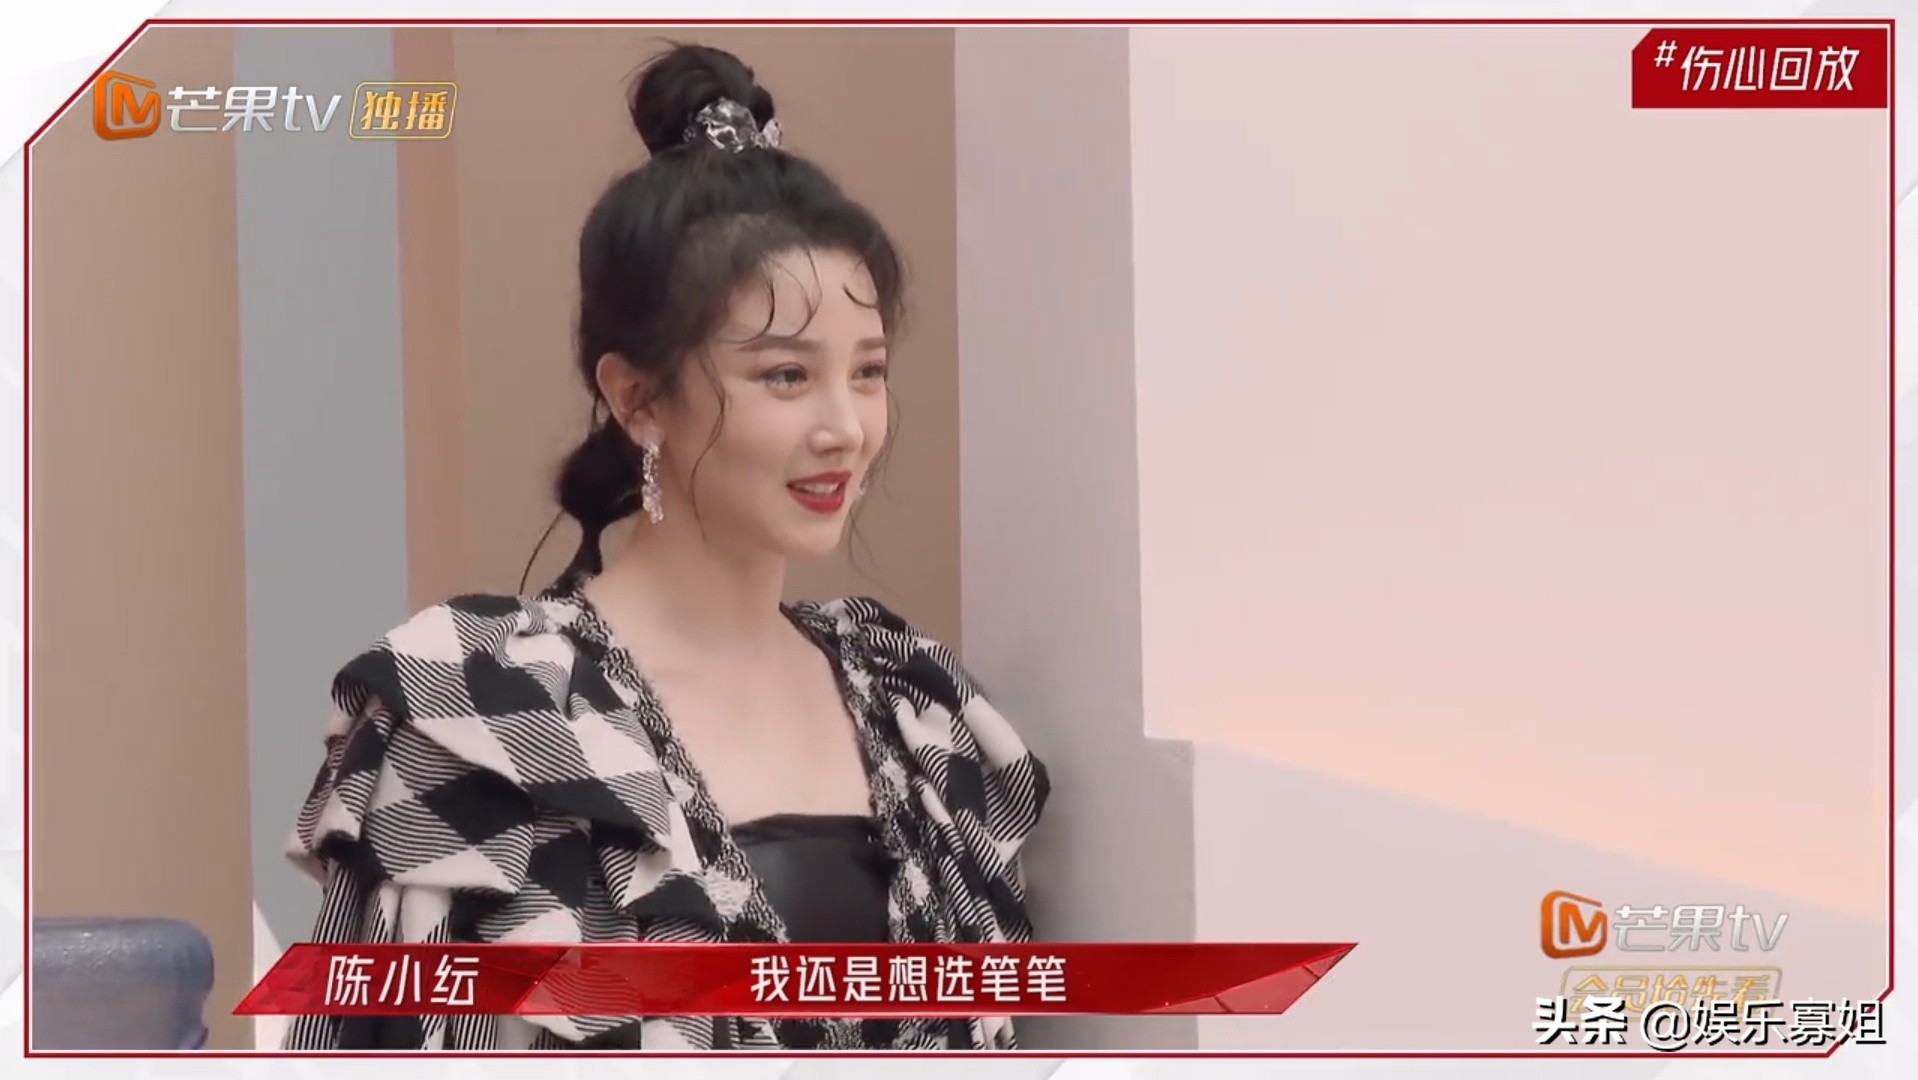 " the elder sister that brave the wind and waves 2 " the expression when Chen Xiaoyun chooses team leader, cause netizen heat to discuss